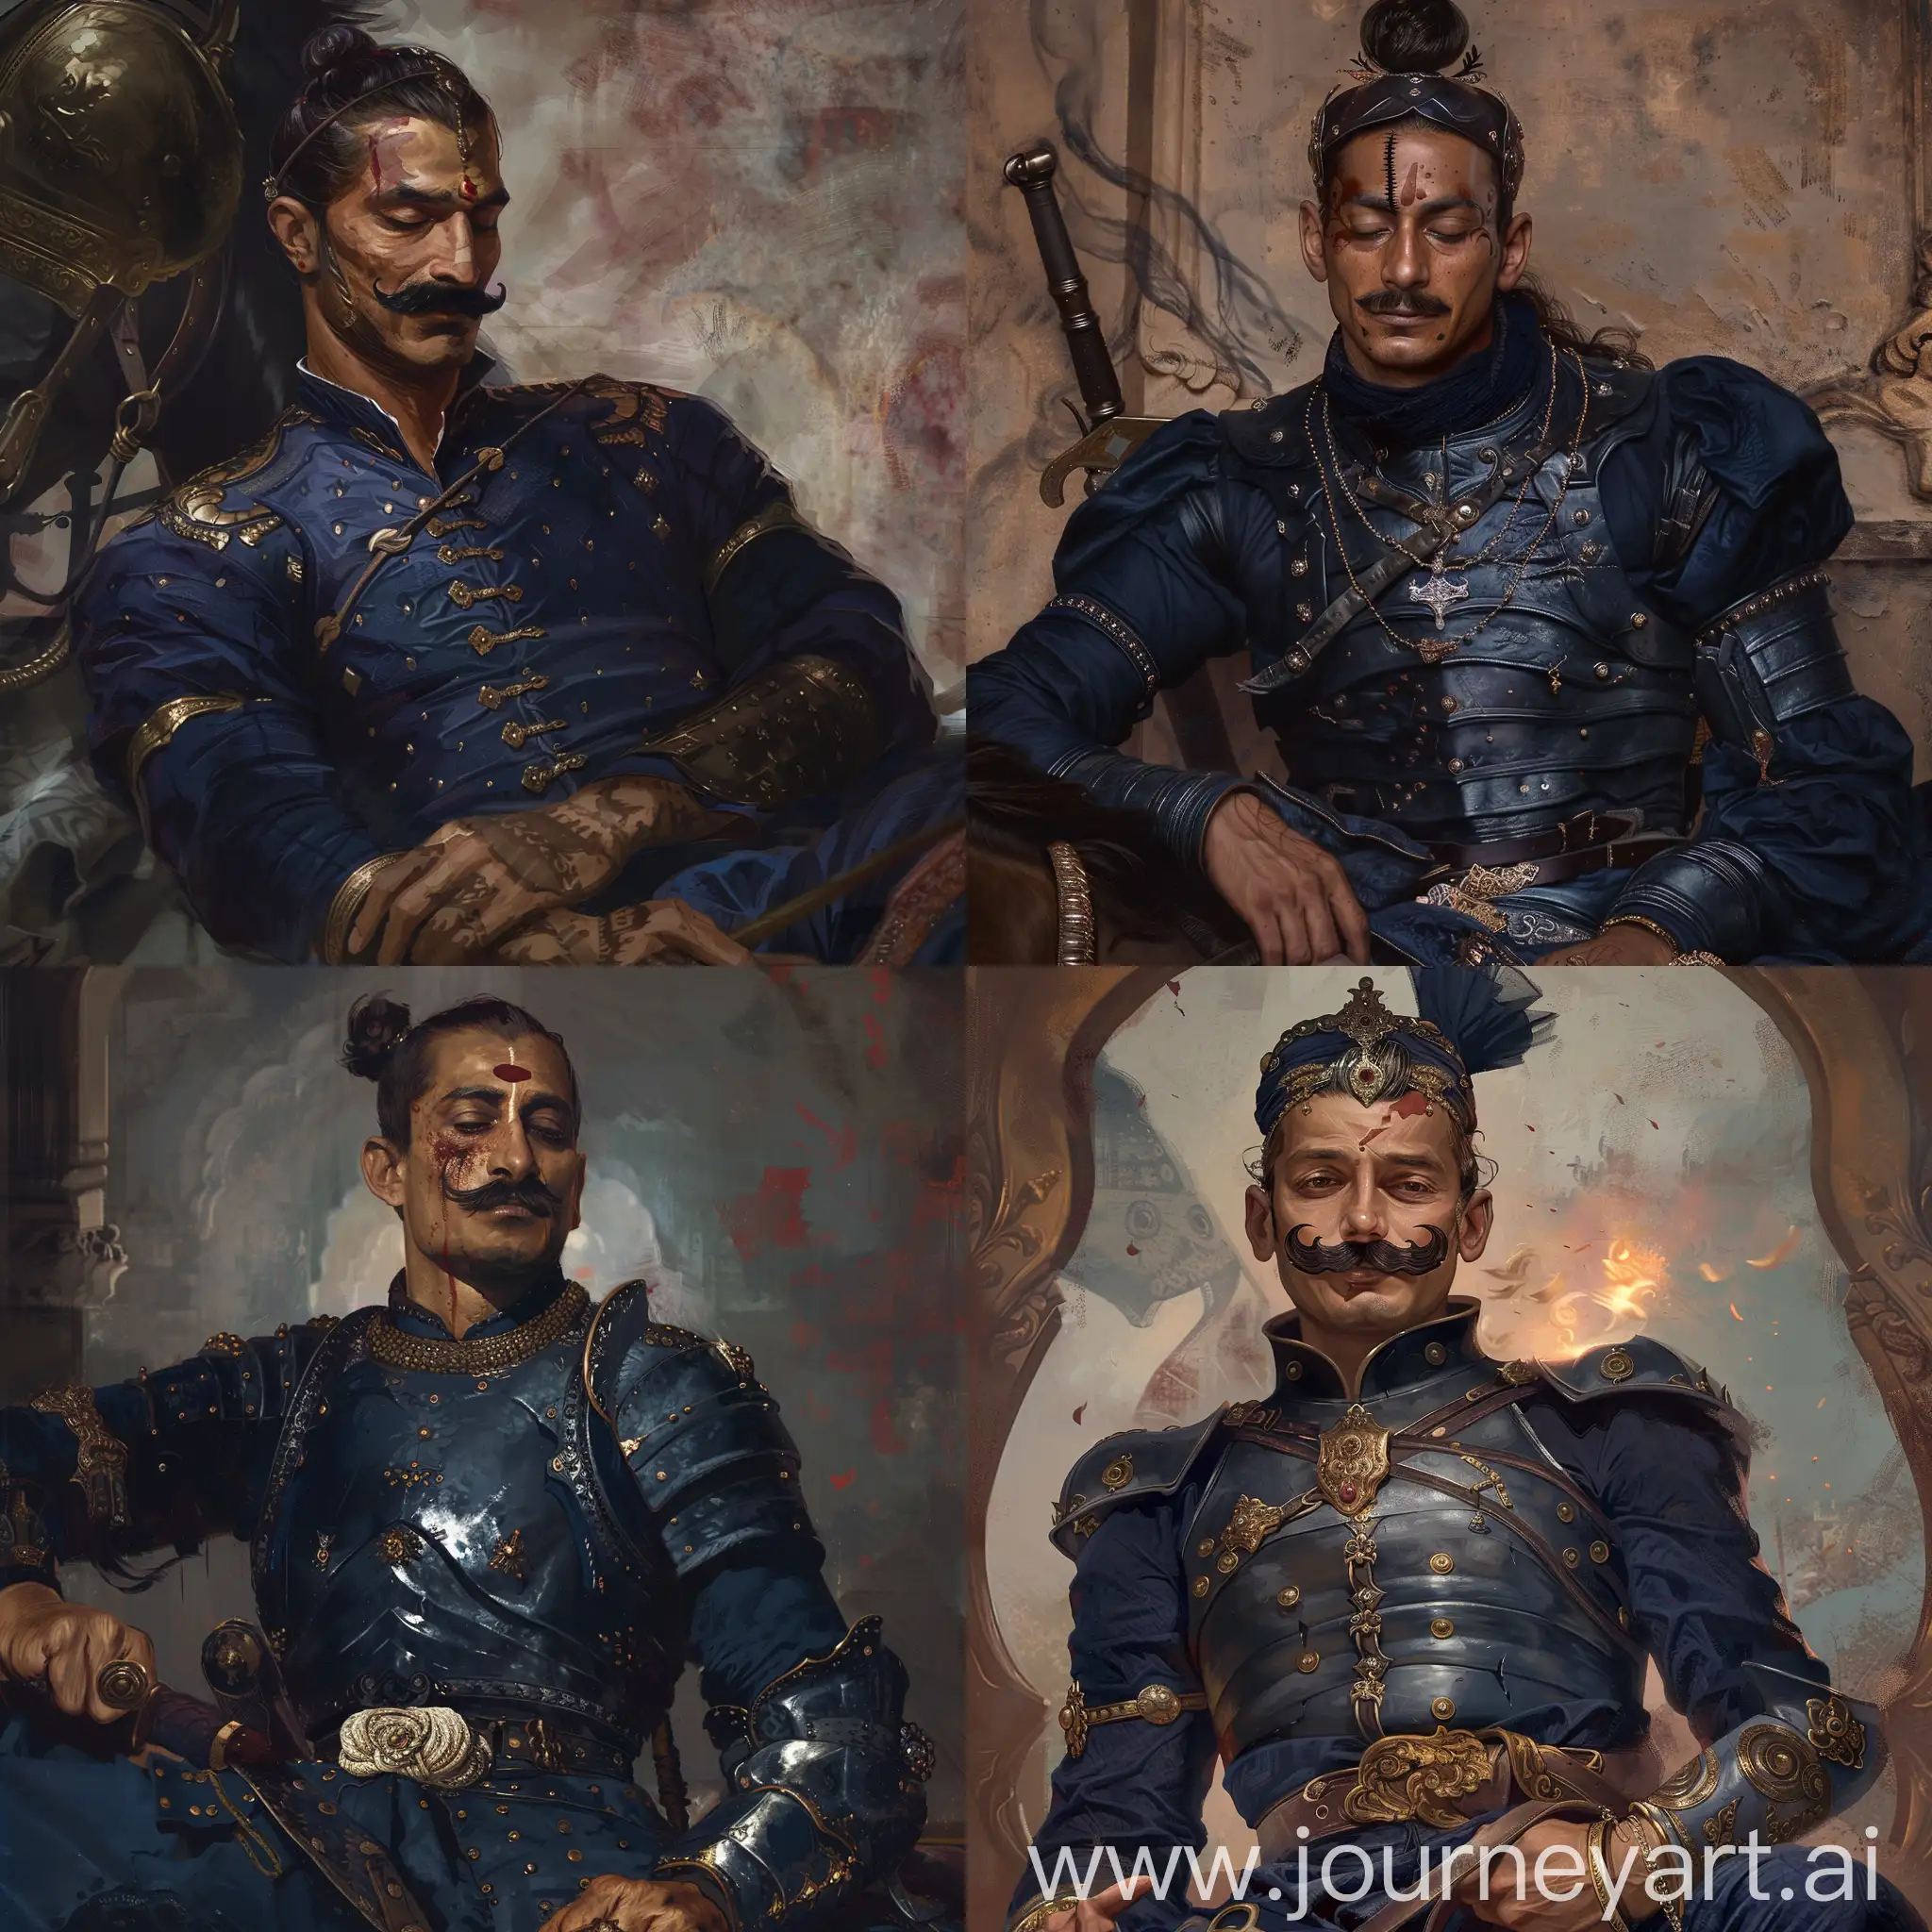 Year is 1490 CE. Imagine rajput king Maharana Sangram Singh. He has lost his left eye and a scar on his left eye running vertically. Left eye  is closed and only right eye is open. He has twirled moustache and clean shaved. He is fierce and calm. He is wearing navy blue clothes under a armor and a helmet on his head. He is sitting on a horse with a sword in his hand. His left hand is only till the elbow.